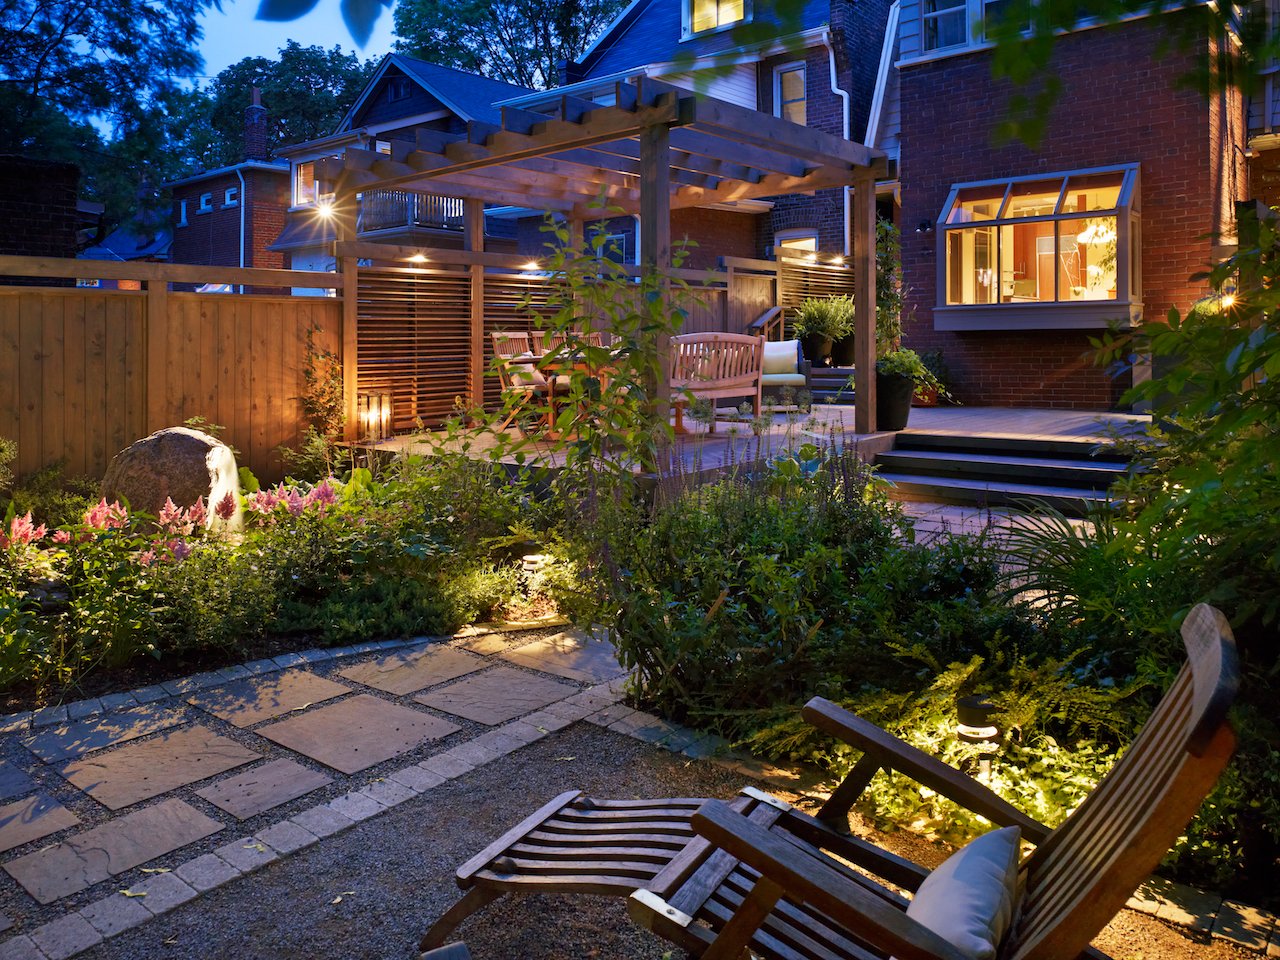 Create Outdoor Space You Loe feature image of a backyard with couches and string lights